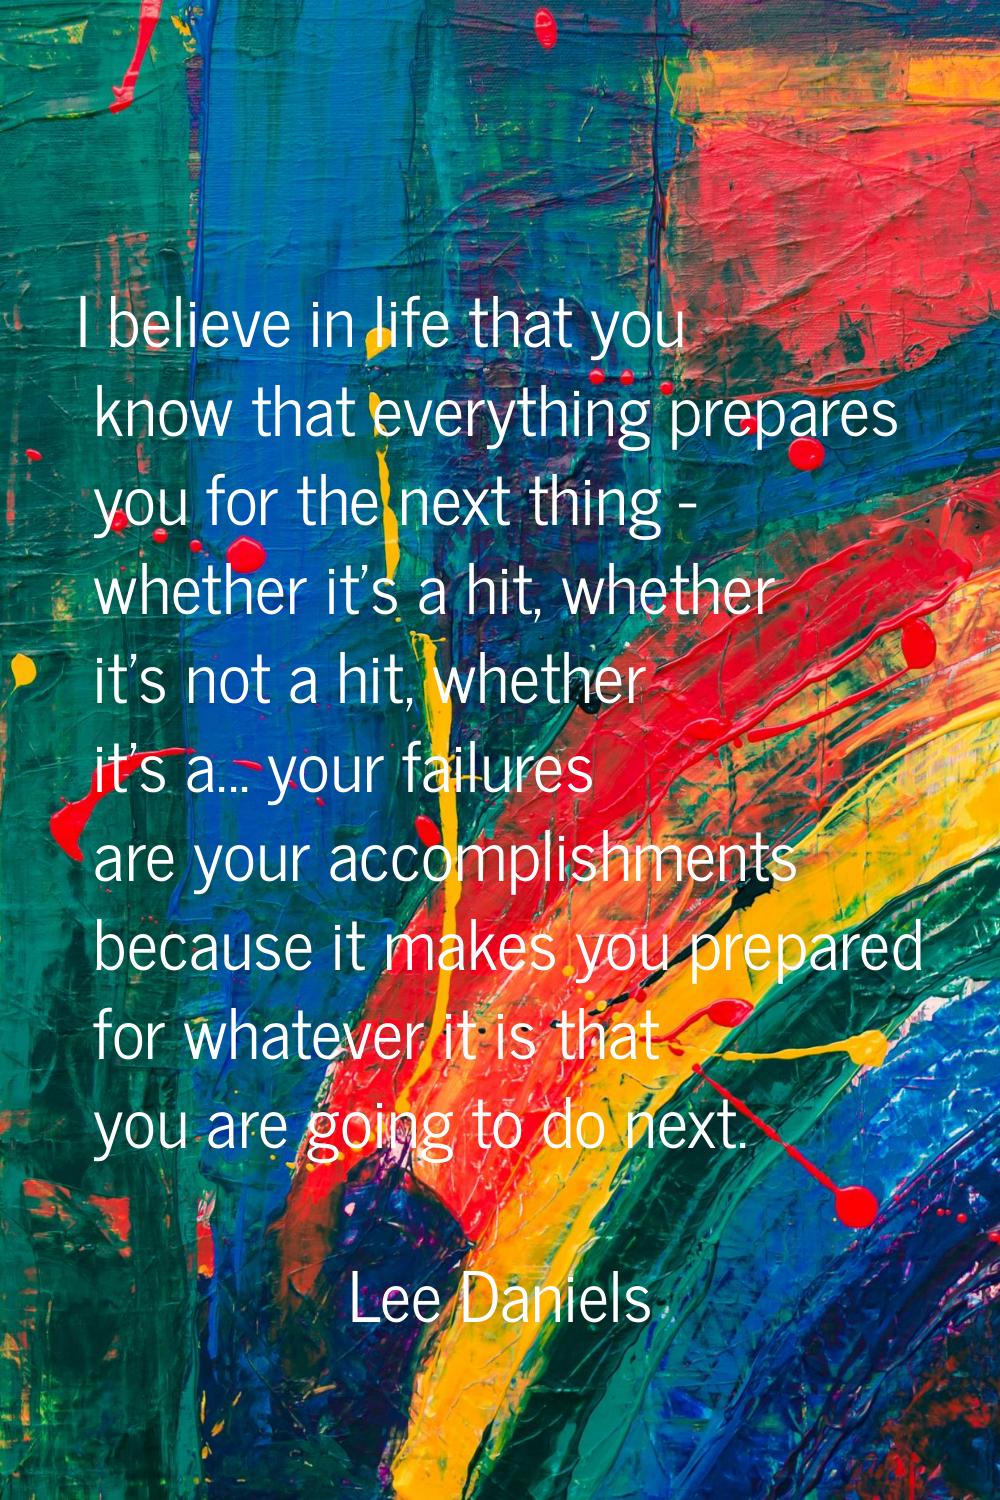 I believe in life that you know that everything prepares you for the next thing - whether it's a hi